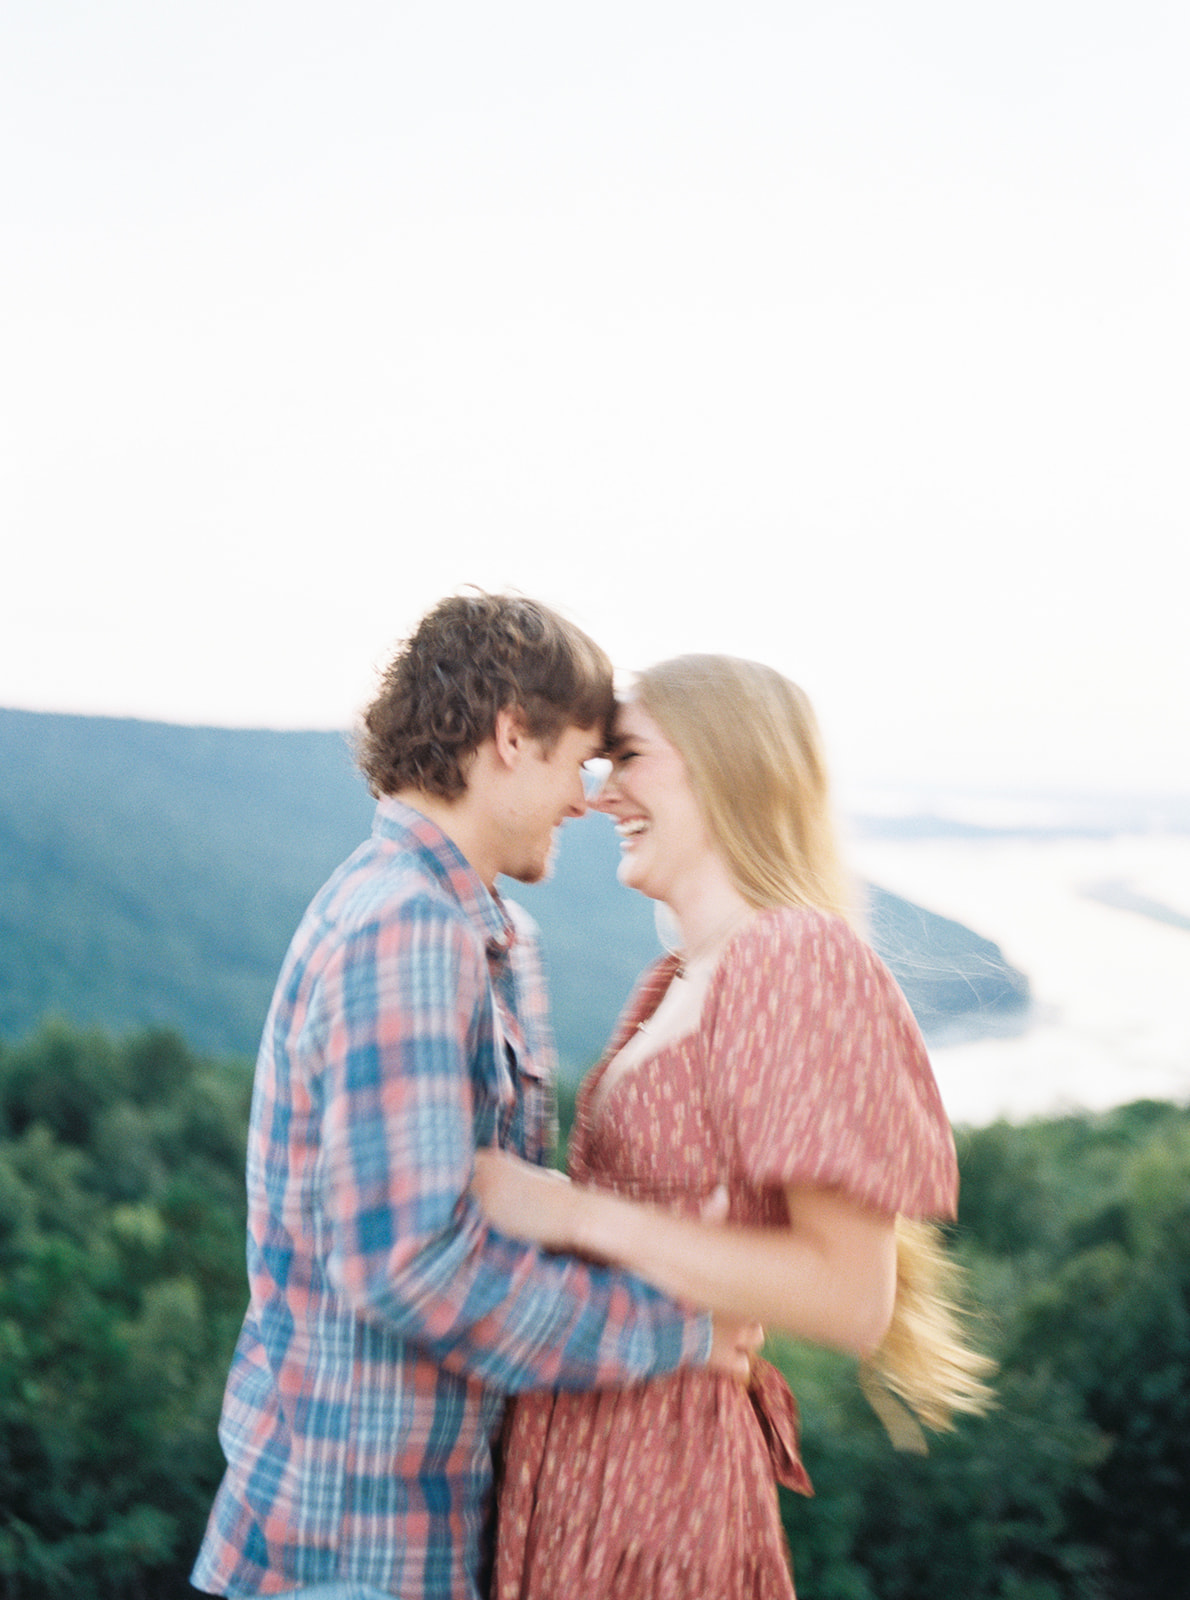 An engaged couple share a laugh over an exquisite view of the lake below in Section, Alabama by Kelsey Dawn Photography